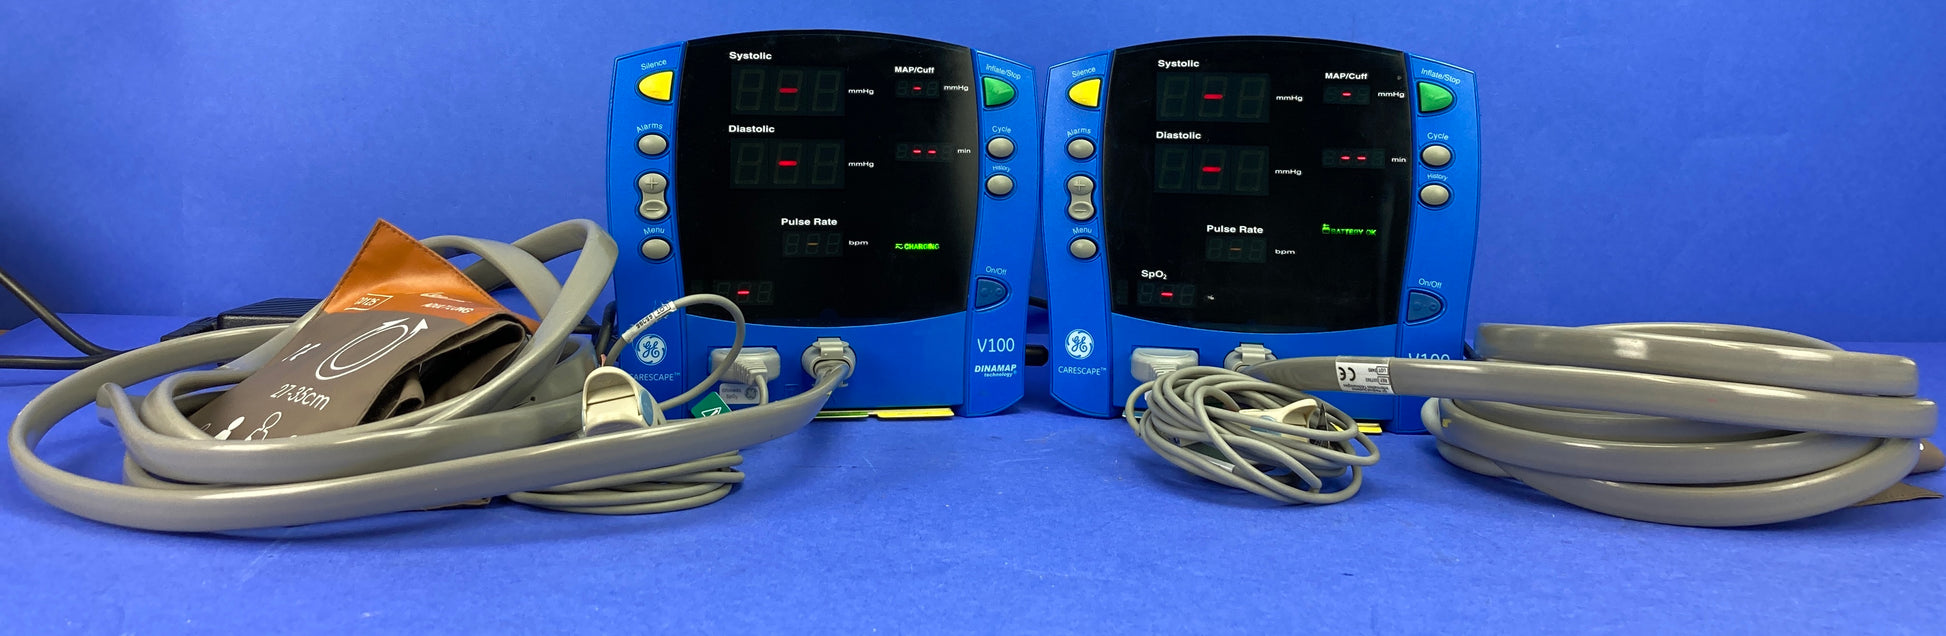 GE DInamap V100 2 in 1 Vital Sign Monitor with Leads Entering Configuration Mode